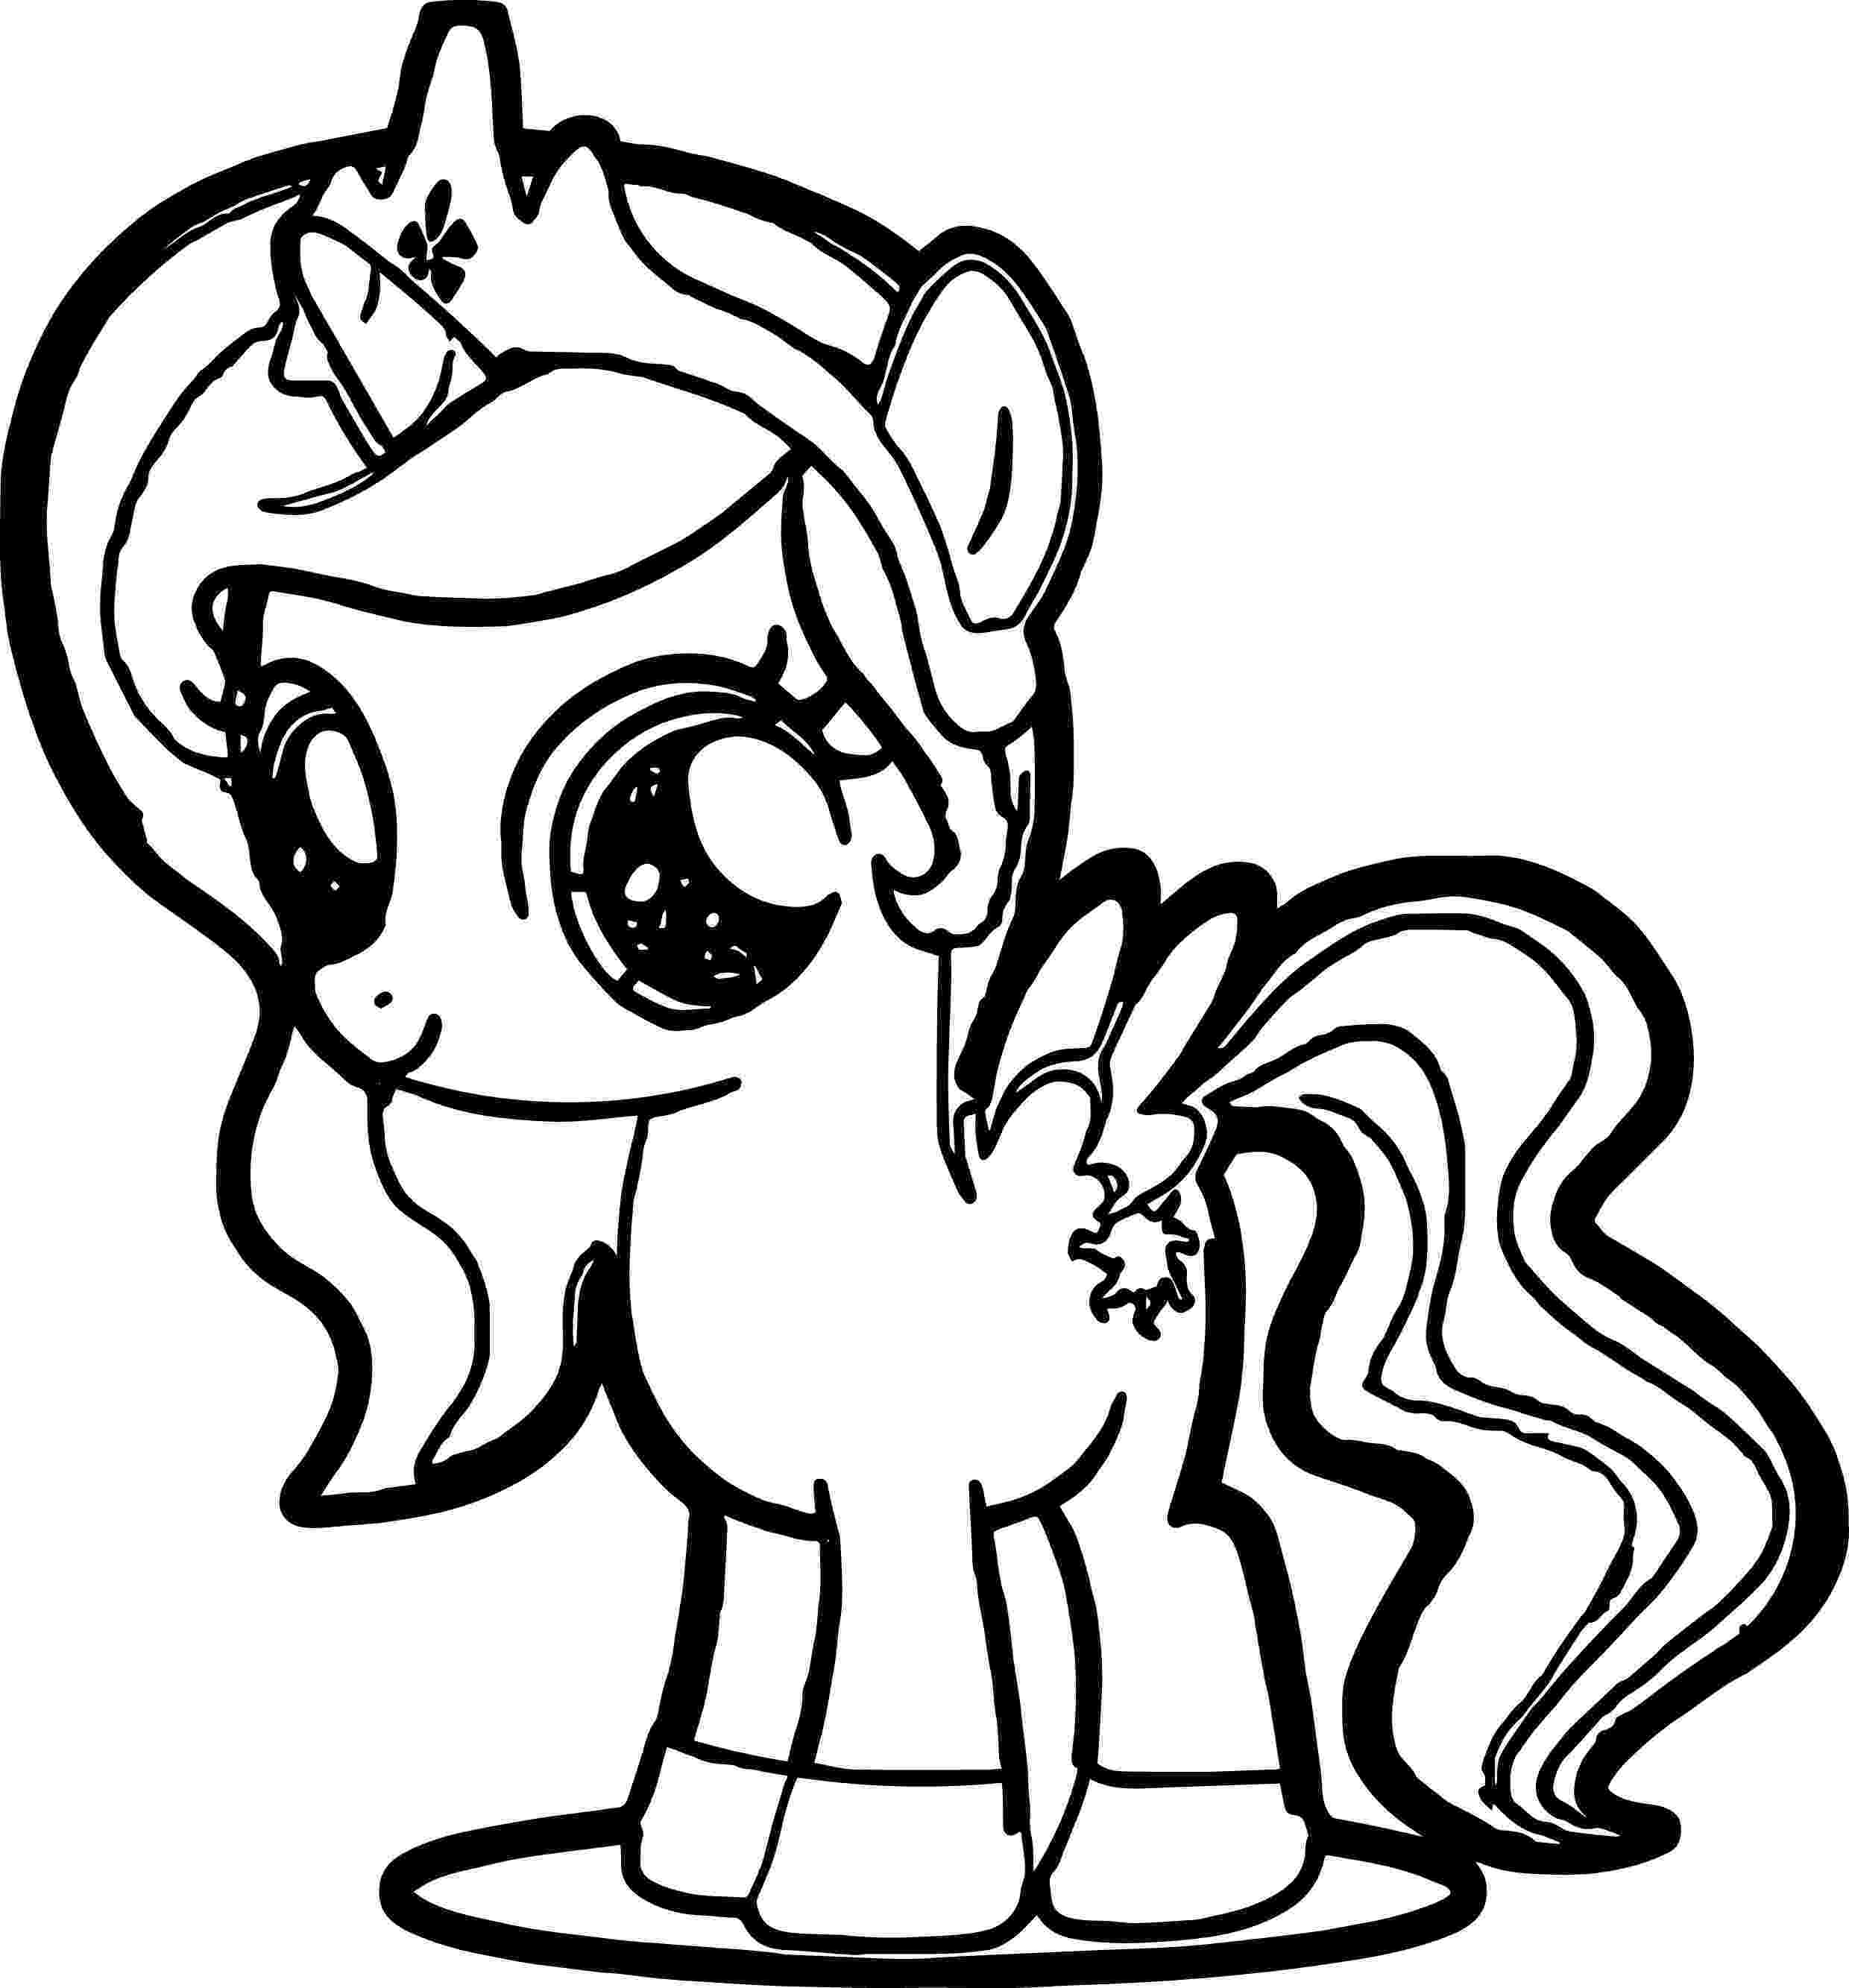 coloring book pony cute pony coloring page wecoloringpagecom coloring pony book 